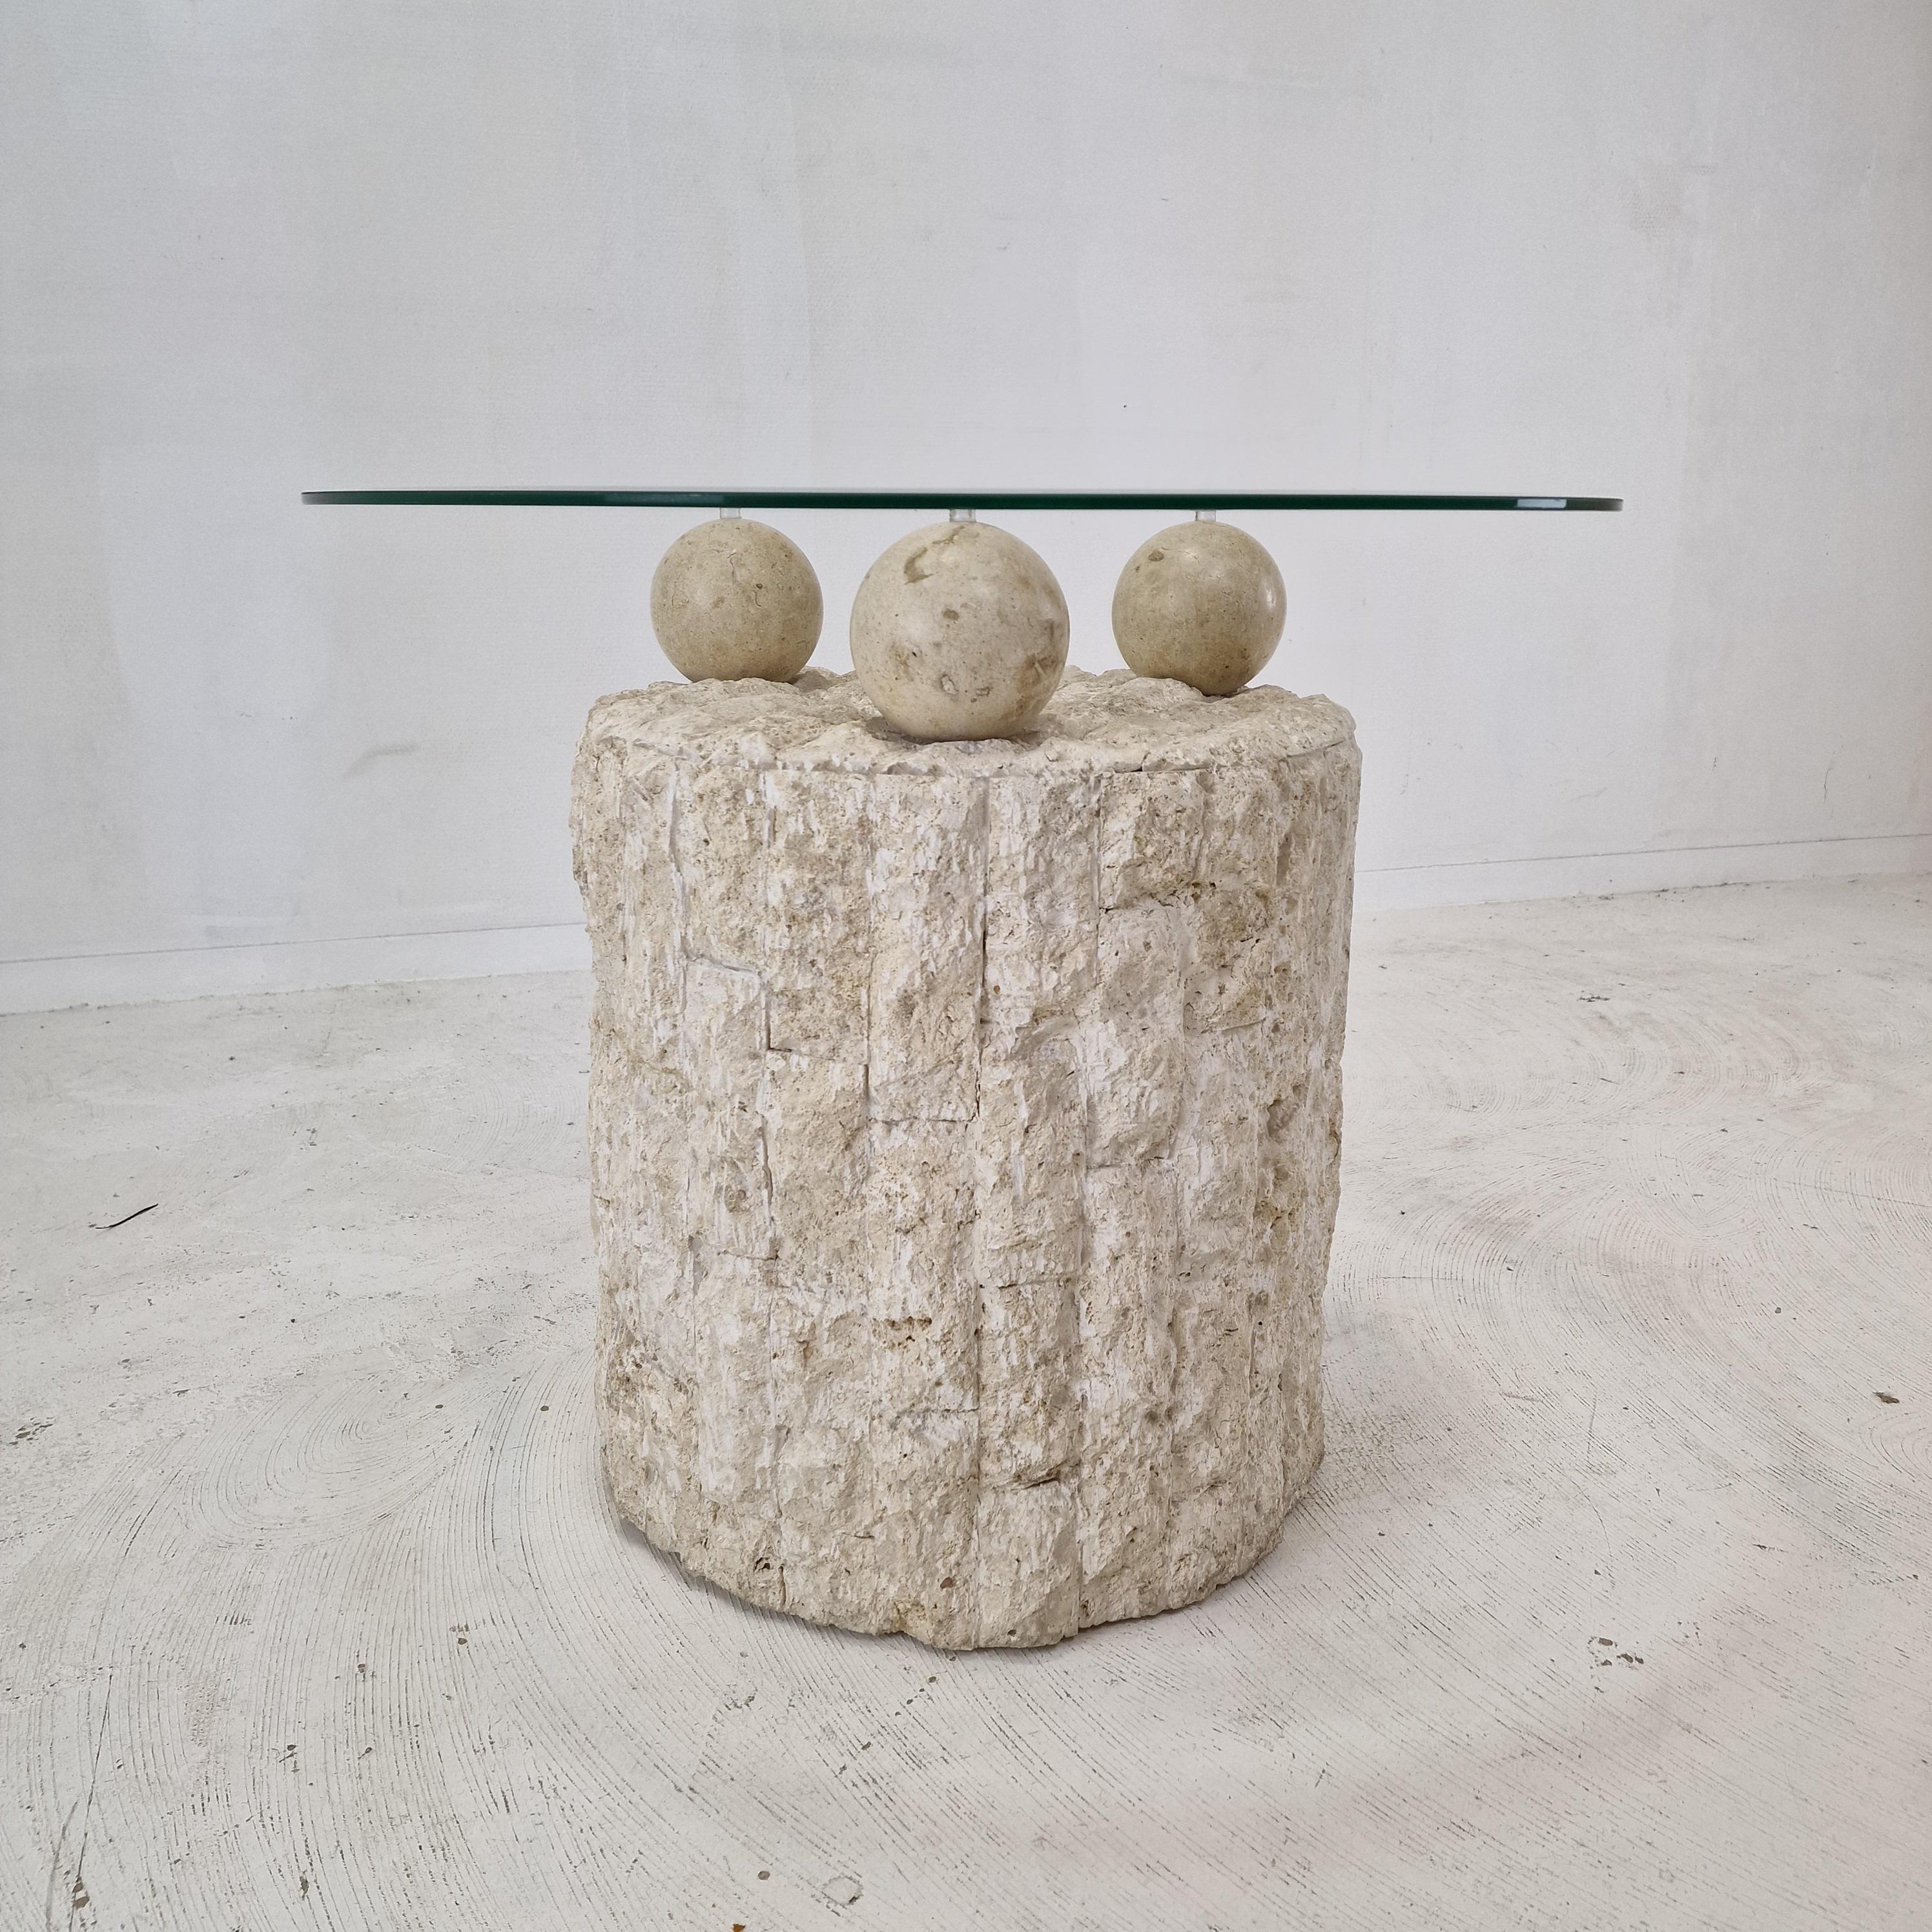 Post-Modern Magnussen Ponte Mactan Stone Coffee or Fossil Stone Table, 1980s